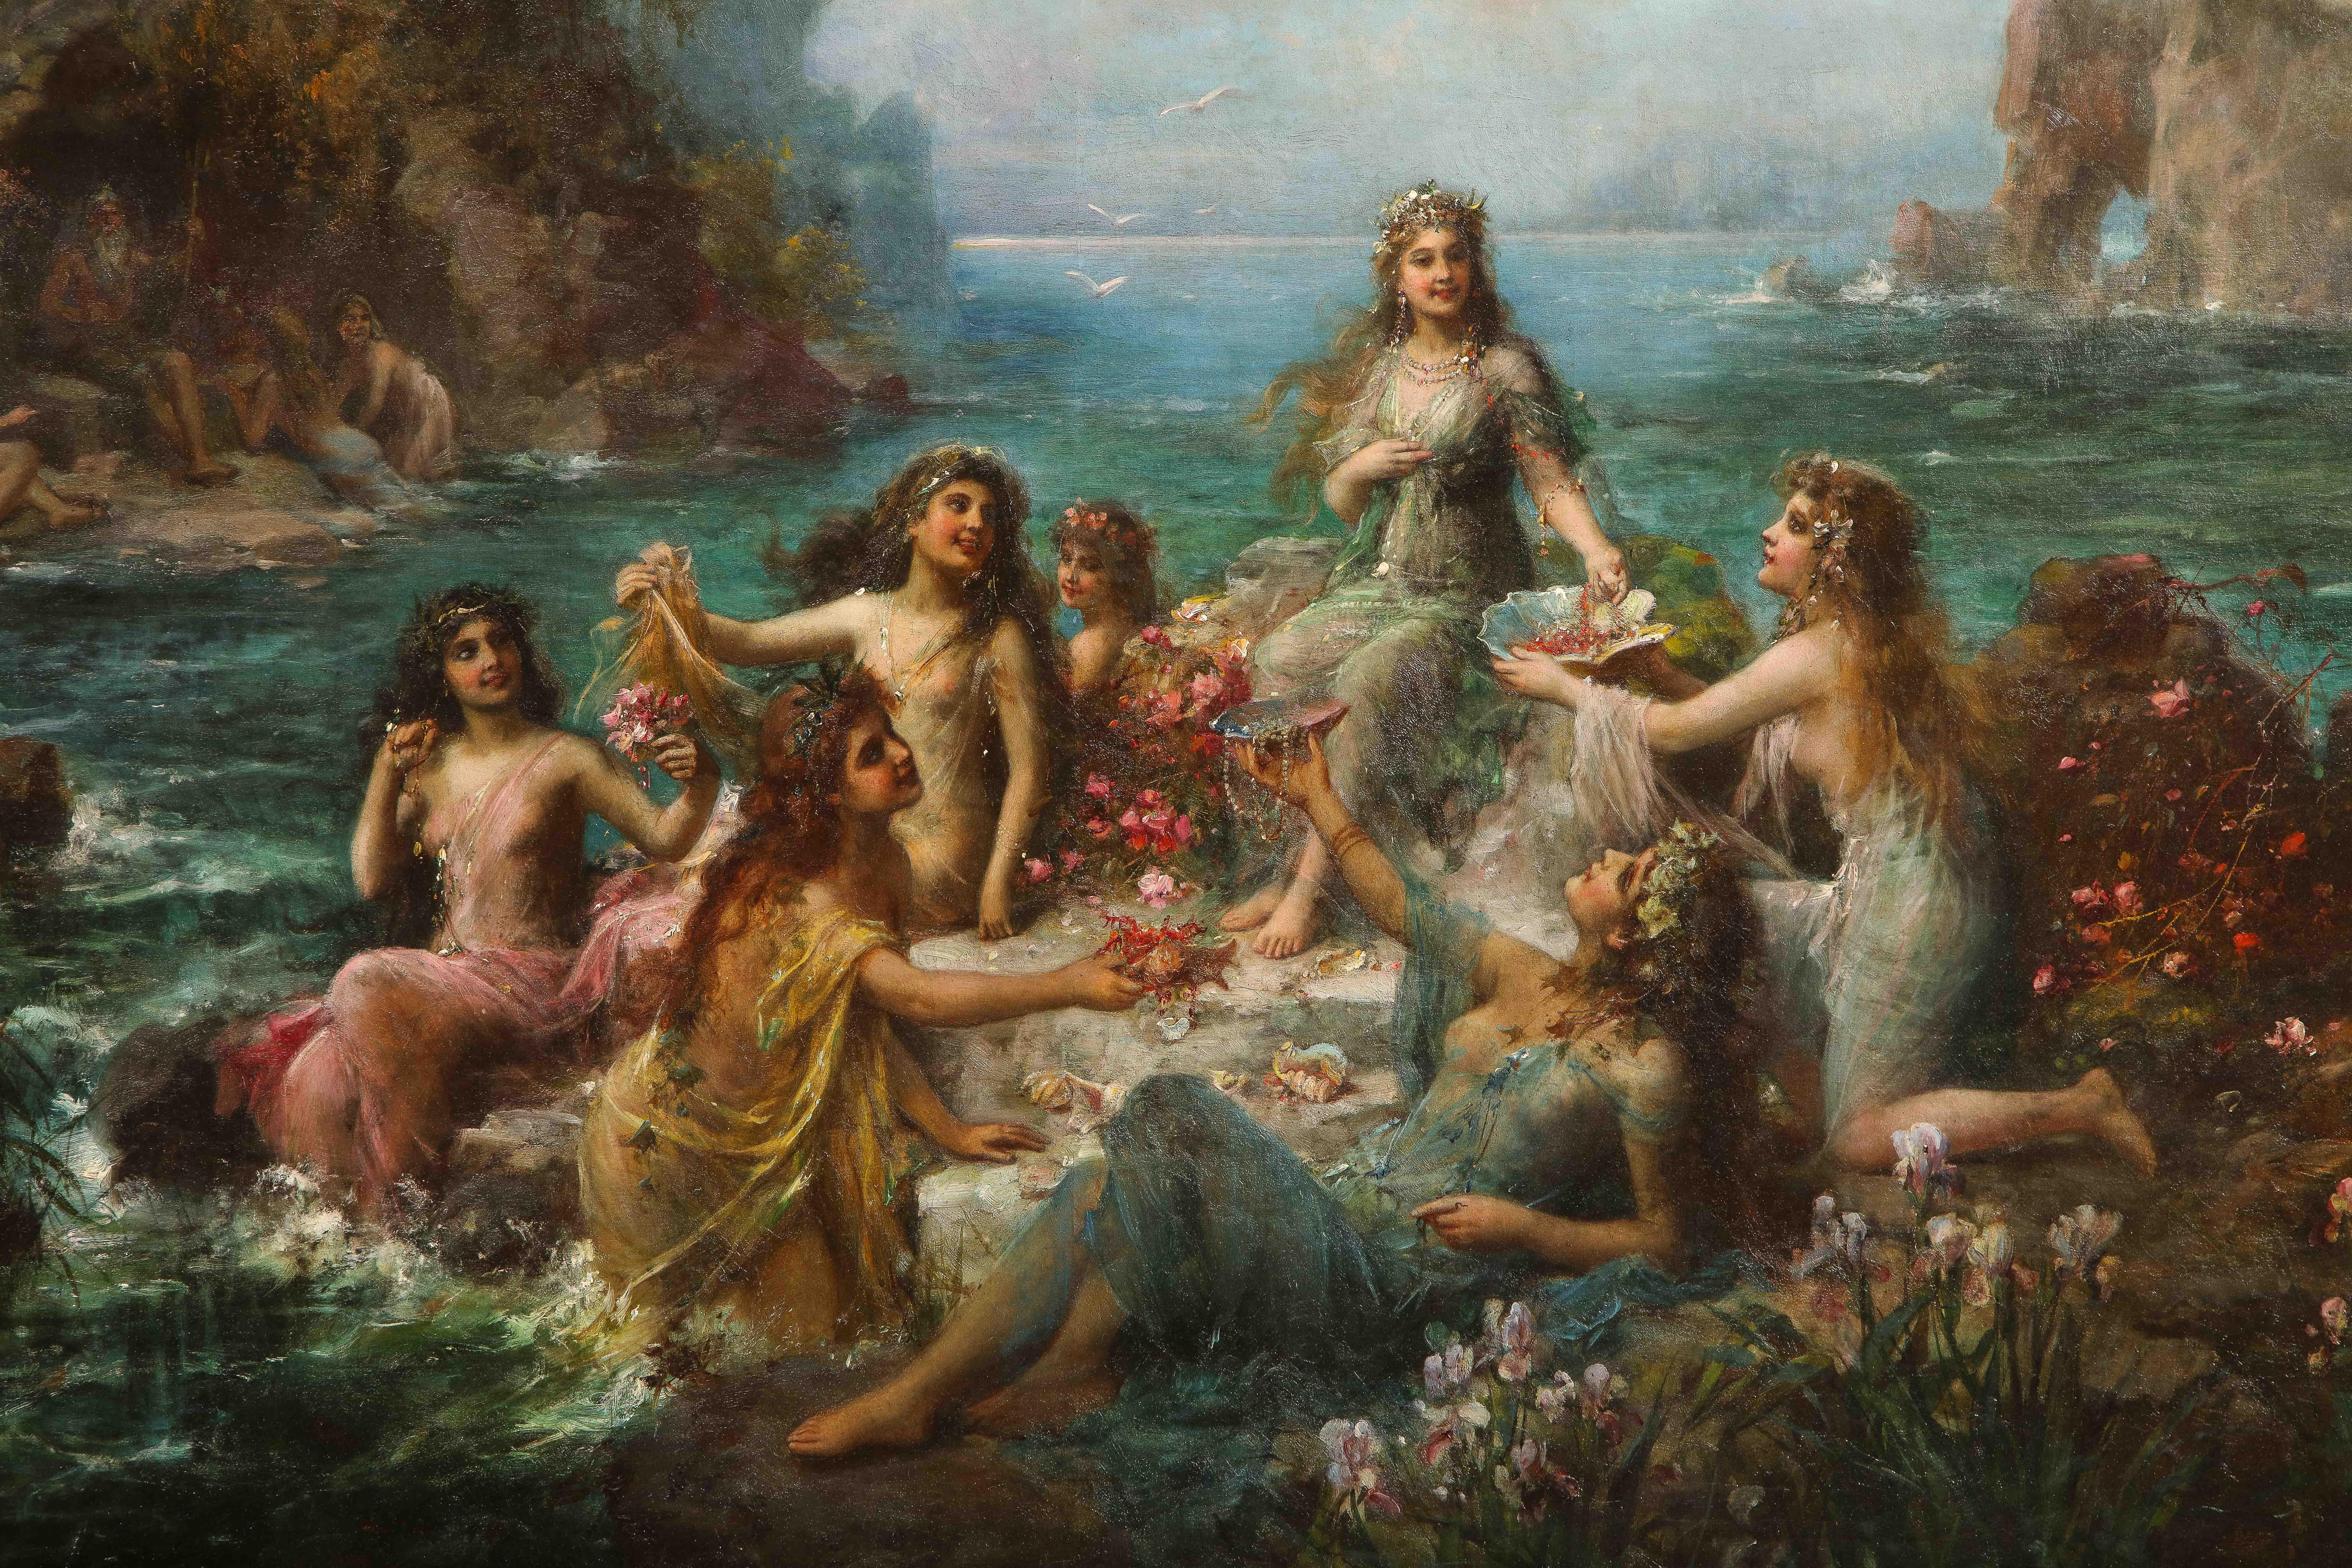 Emanuel Oberhauser (Austrian 1854 - 1919) “Mermaids, Neptune and Sea Water Nymphs” 

An Exceptional Oil on Canvas Painting painted circa 1885. 

Masterfully painted, this artwork depicts a full scale portrait of “Mermaids, Neptune and Sea Water